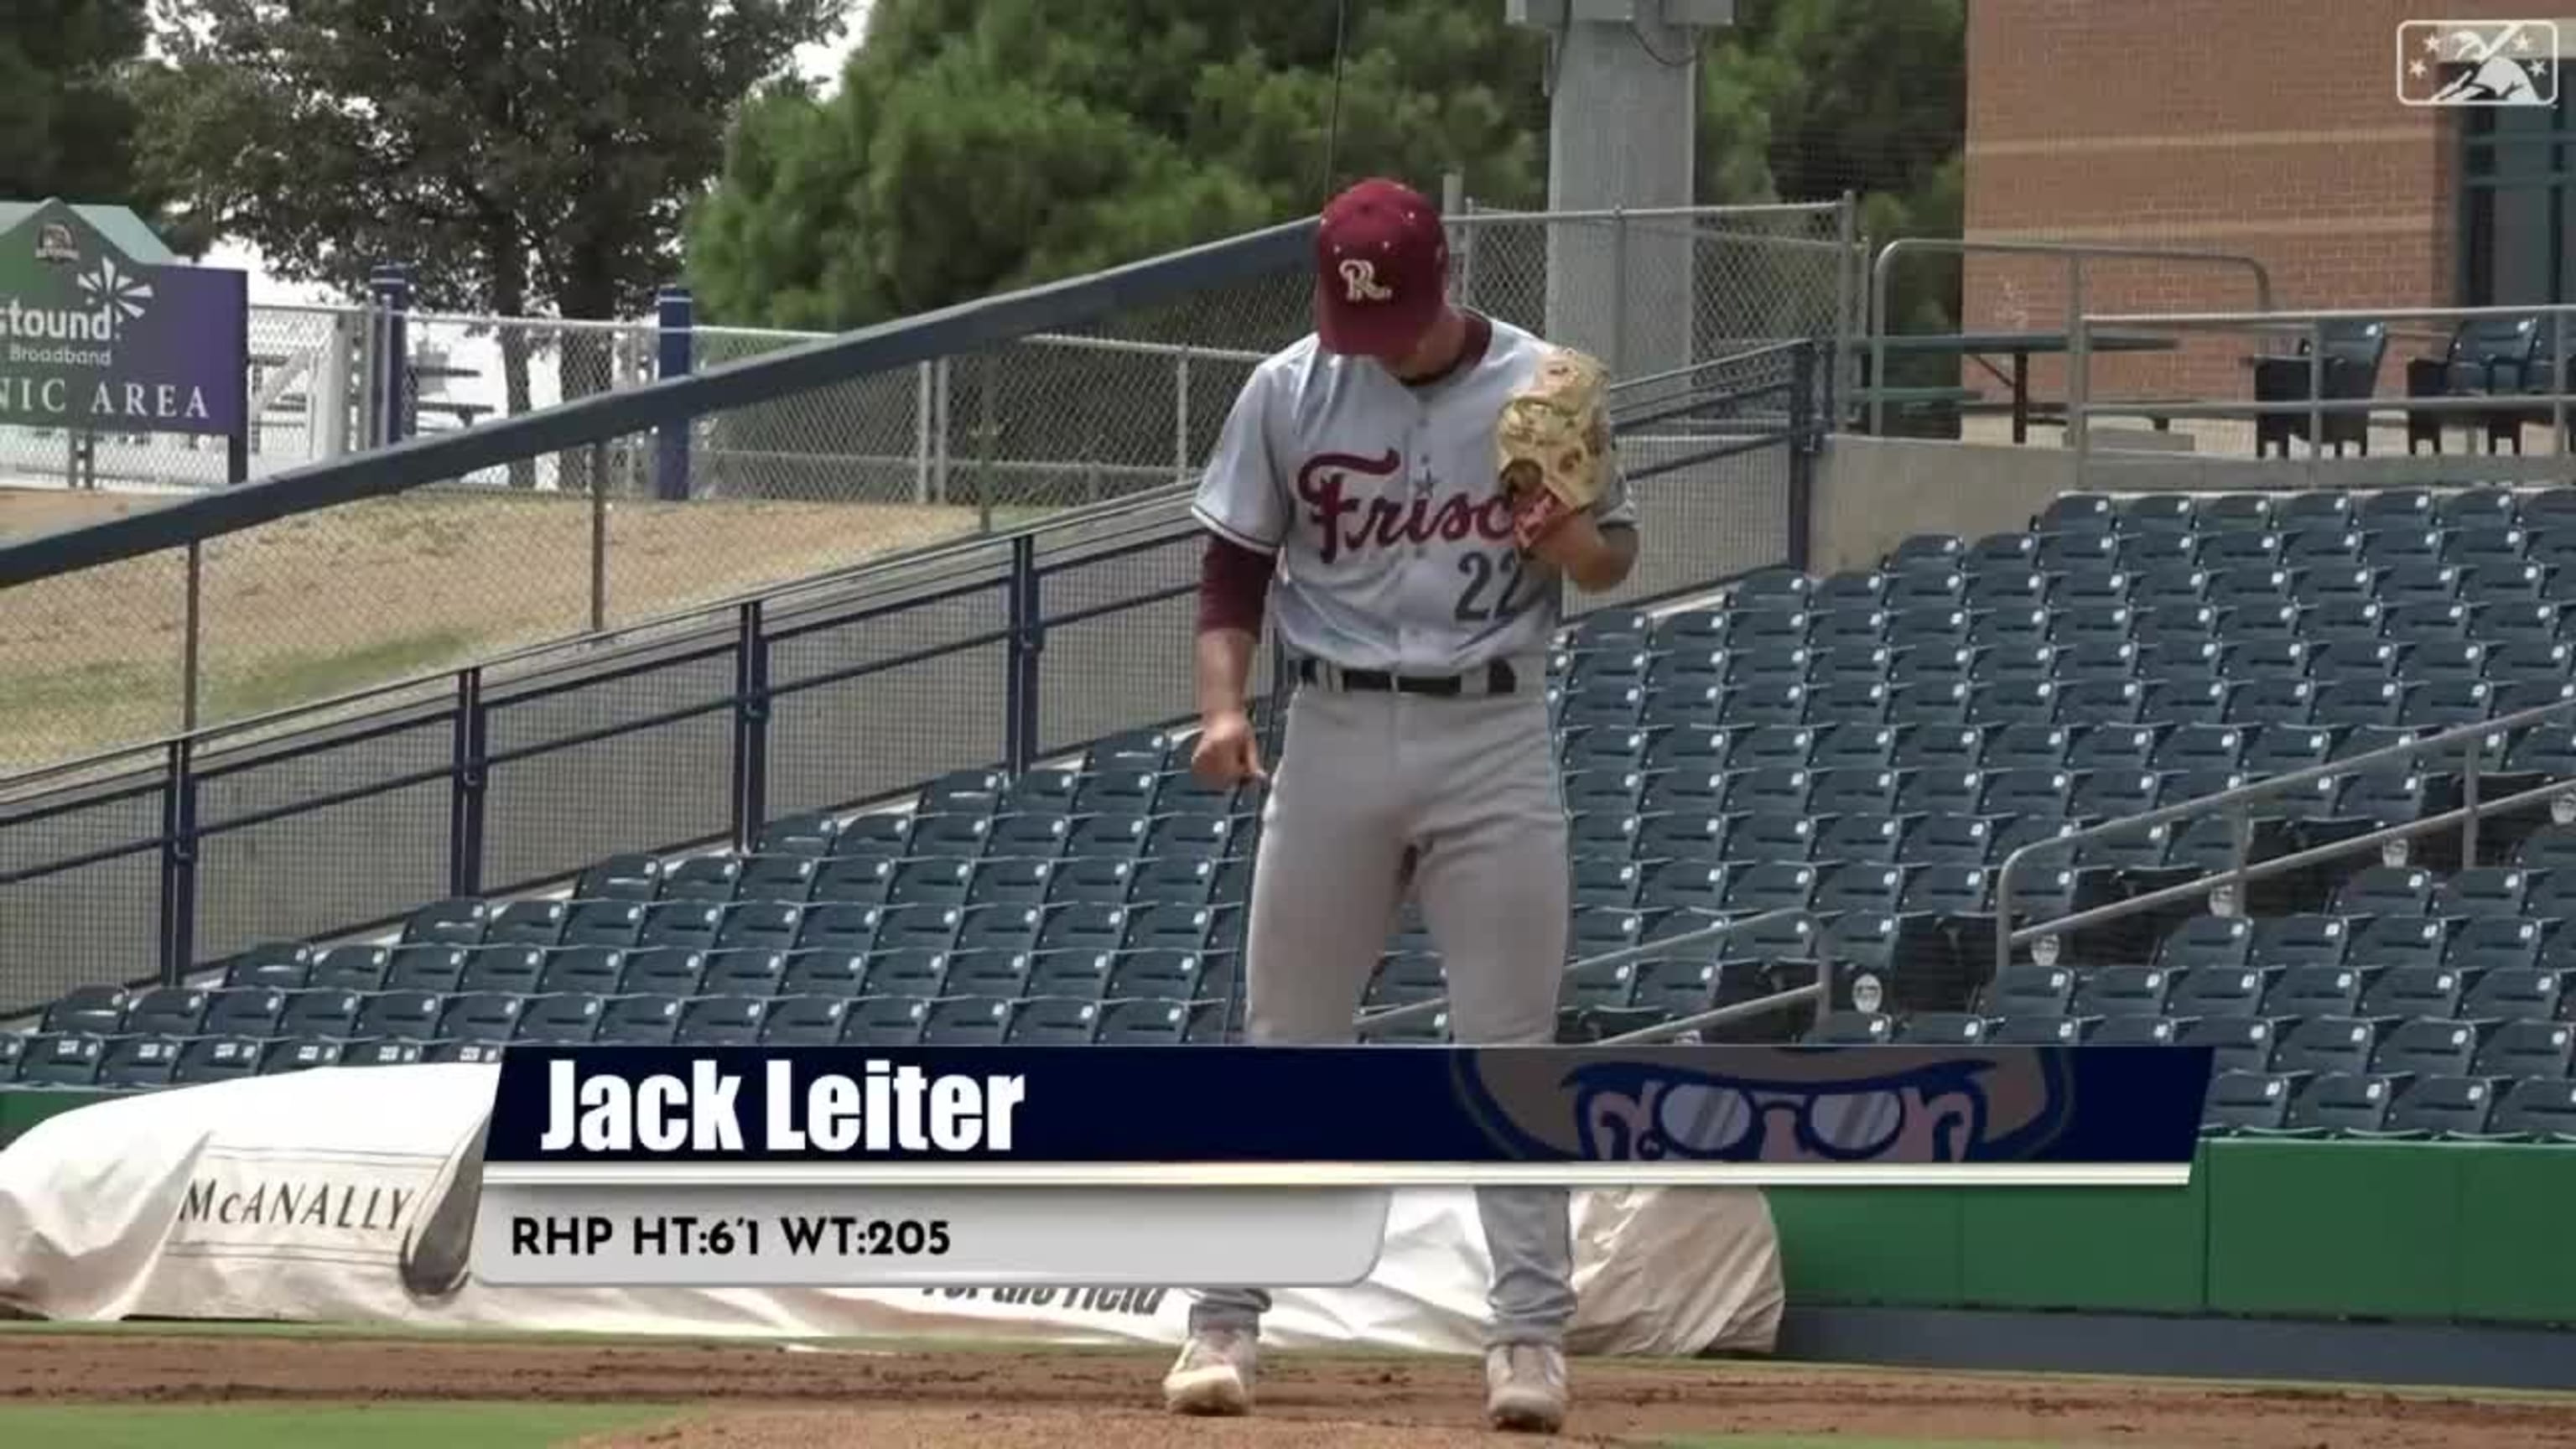 Rangers' Jack Leiter returns with solid Frisco RoughRiders start